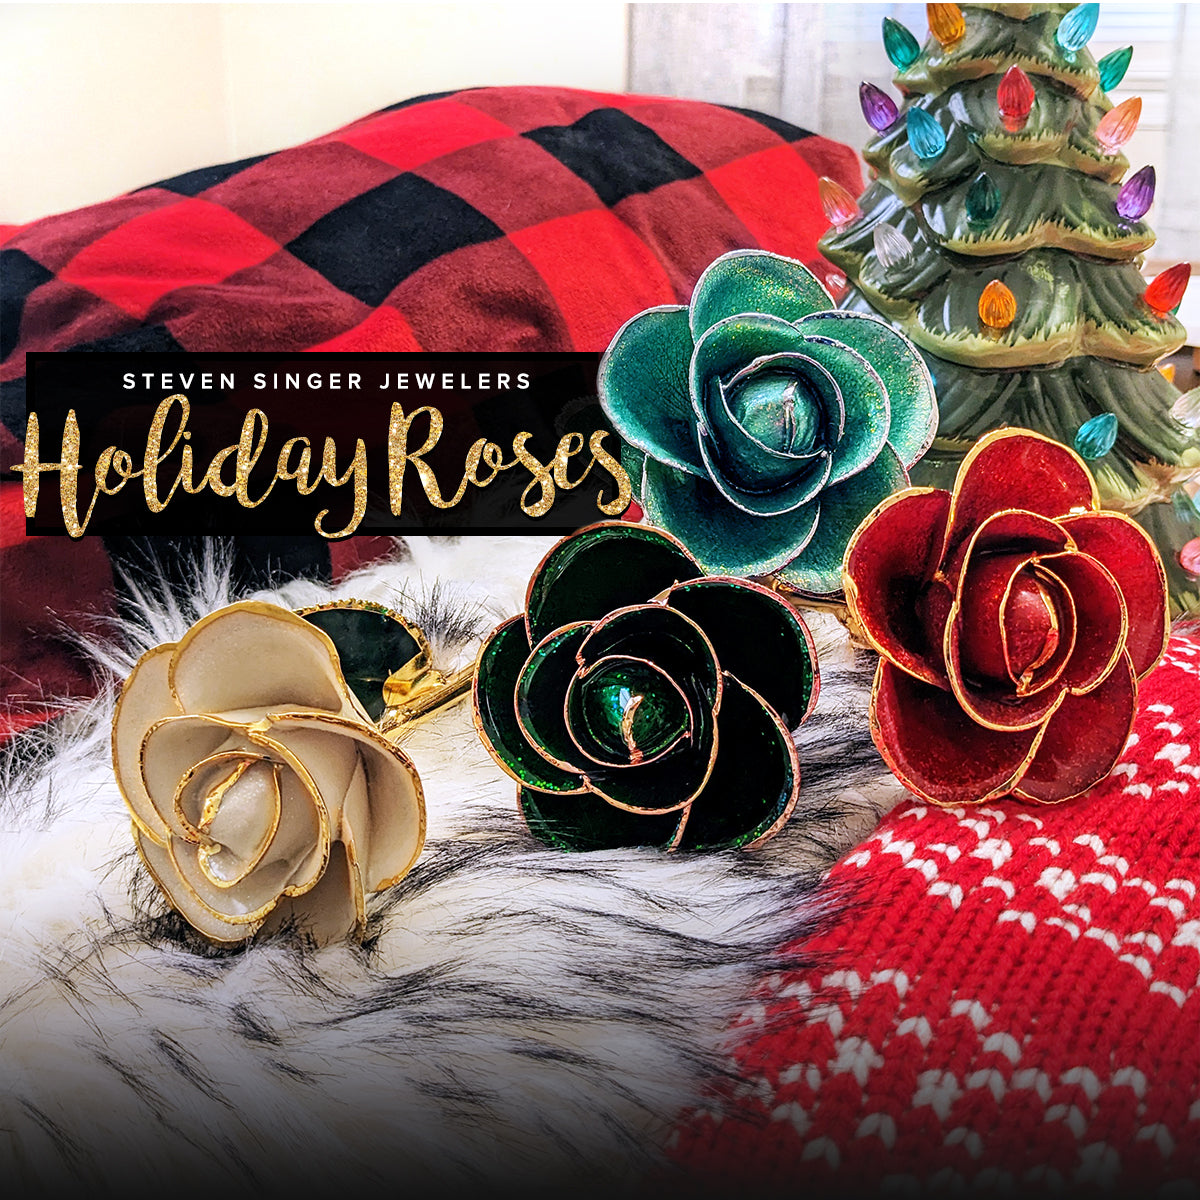 Steven Singer Jewelers' Holiday Gold Dipped Roses